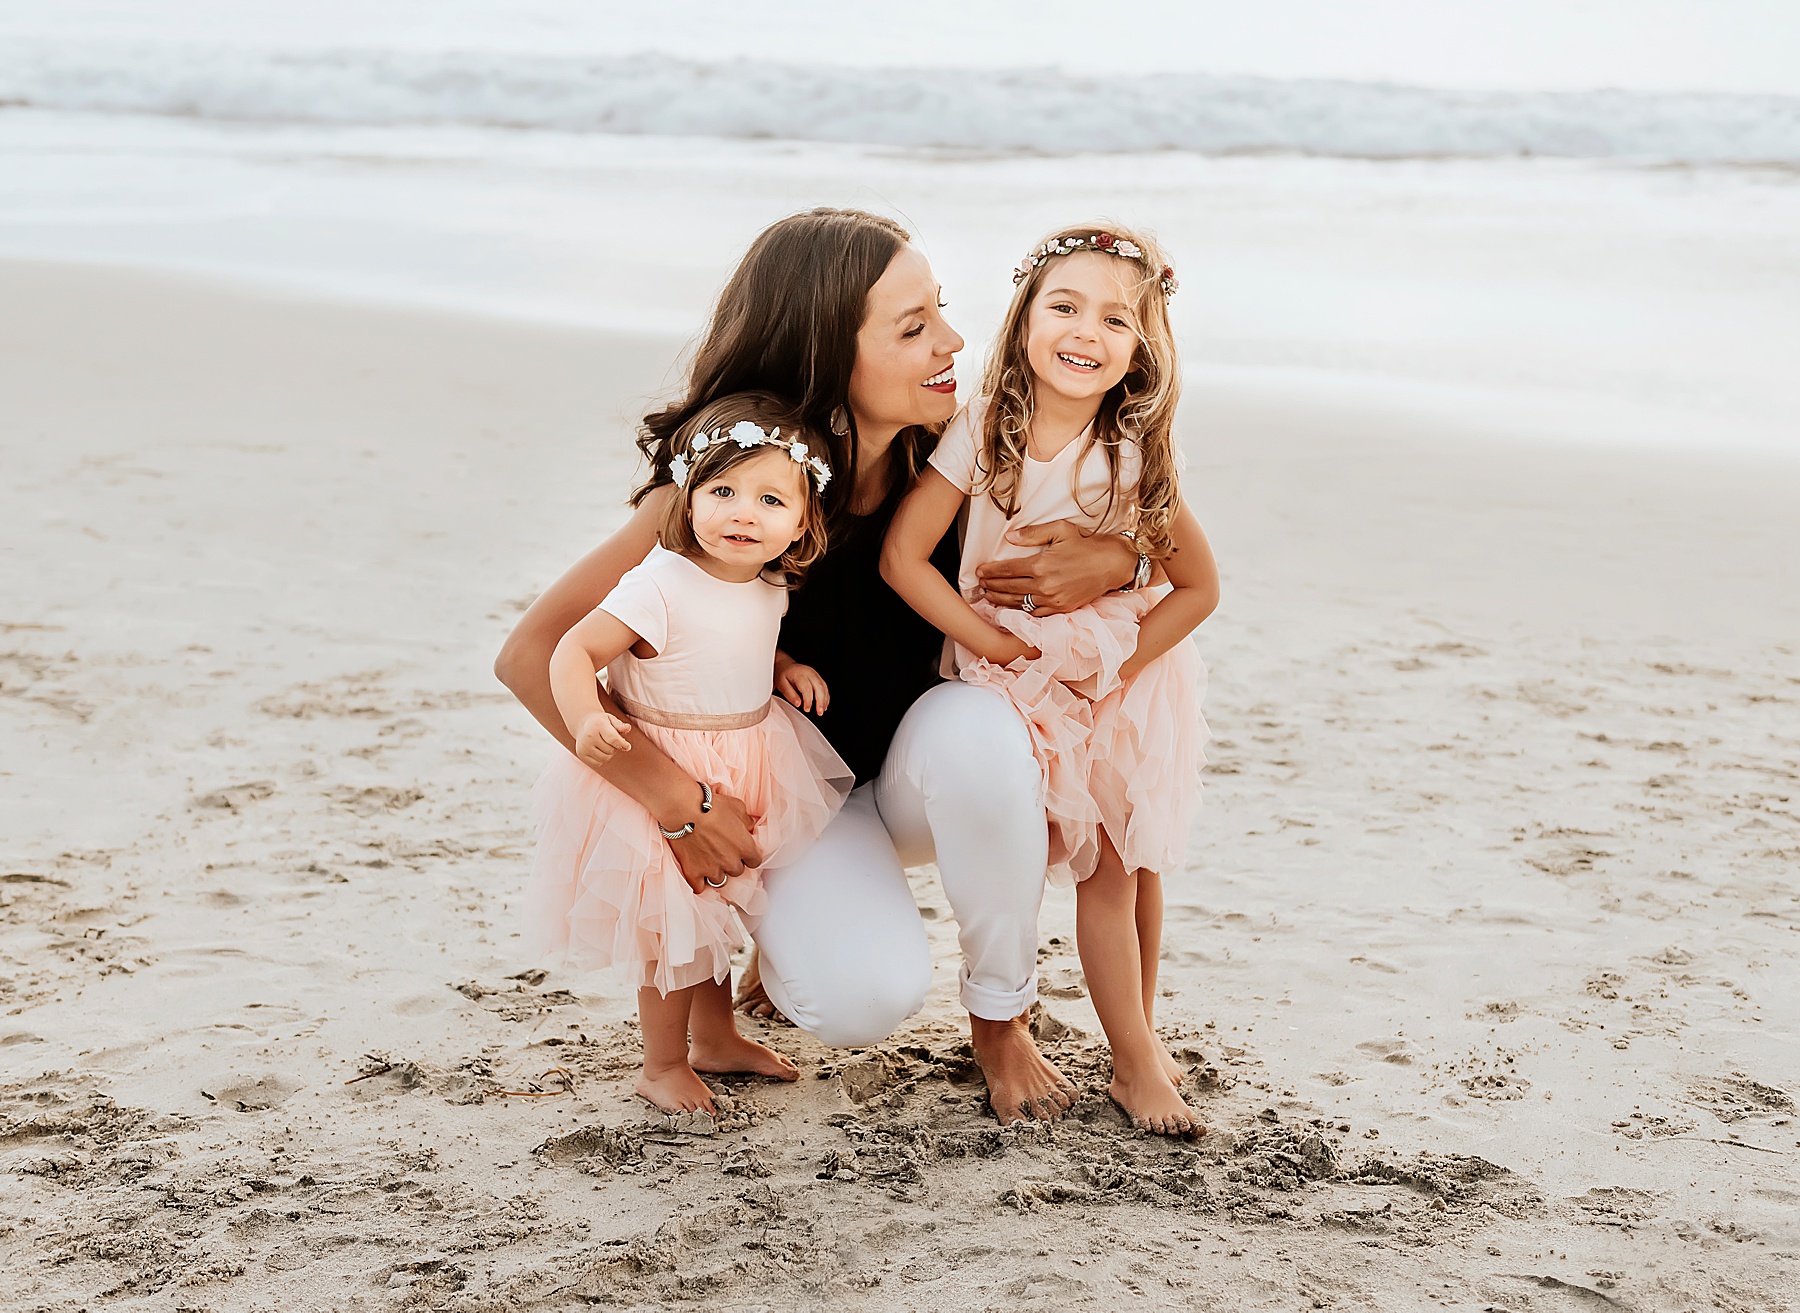 unique beach family photo ideas mom with daughters